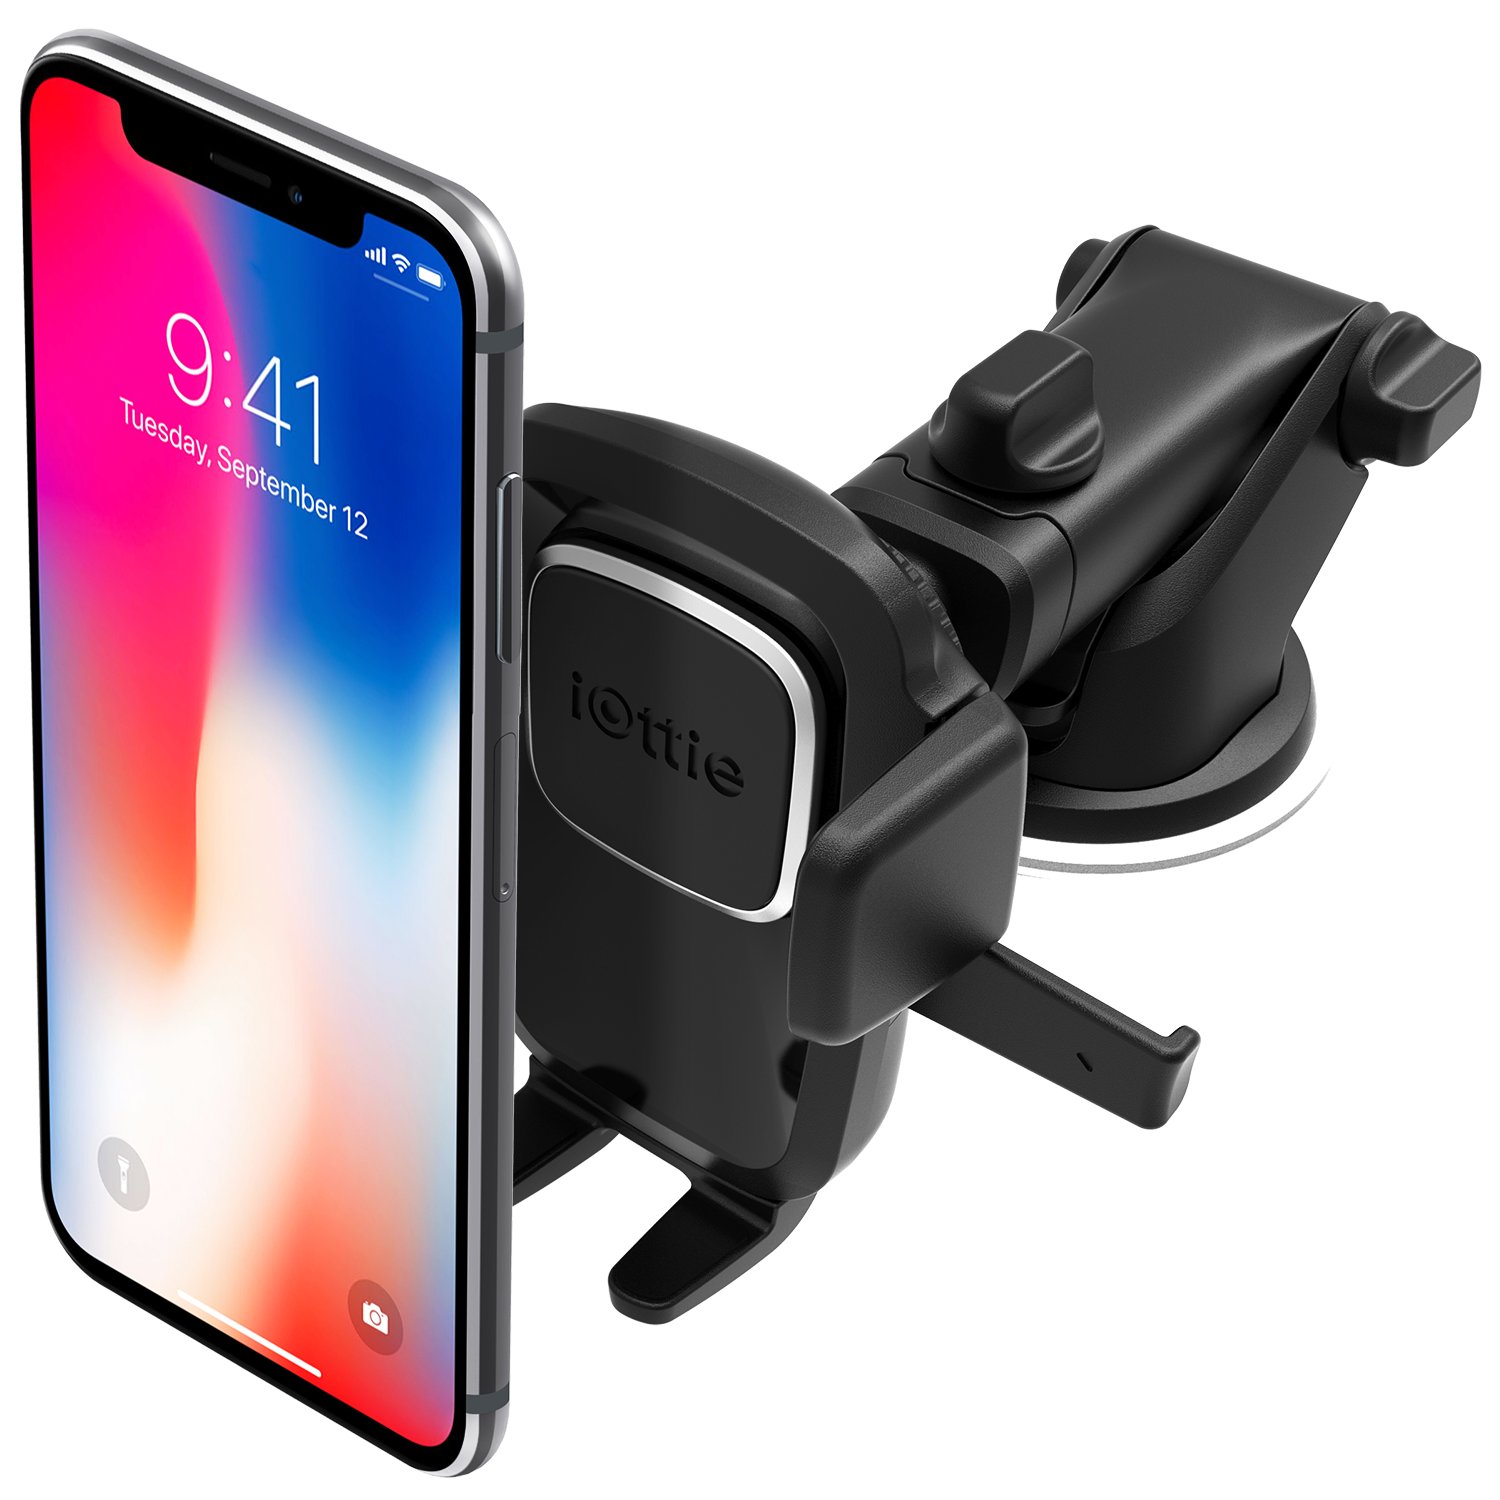 iOttie Easy One Touch 4 Dashboard & Windshield Car Mount Holder for iPhone X, 8, 8 Plus, 7 Plus, 6s Plus, 6 SE, Samsung Galaxy S8 Plus S8 Edge S7 S6 Note 8 5SE - image 1 of 6